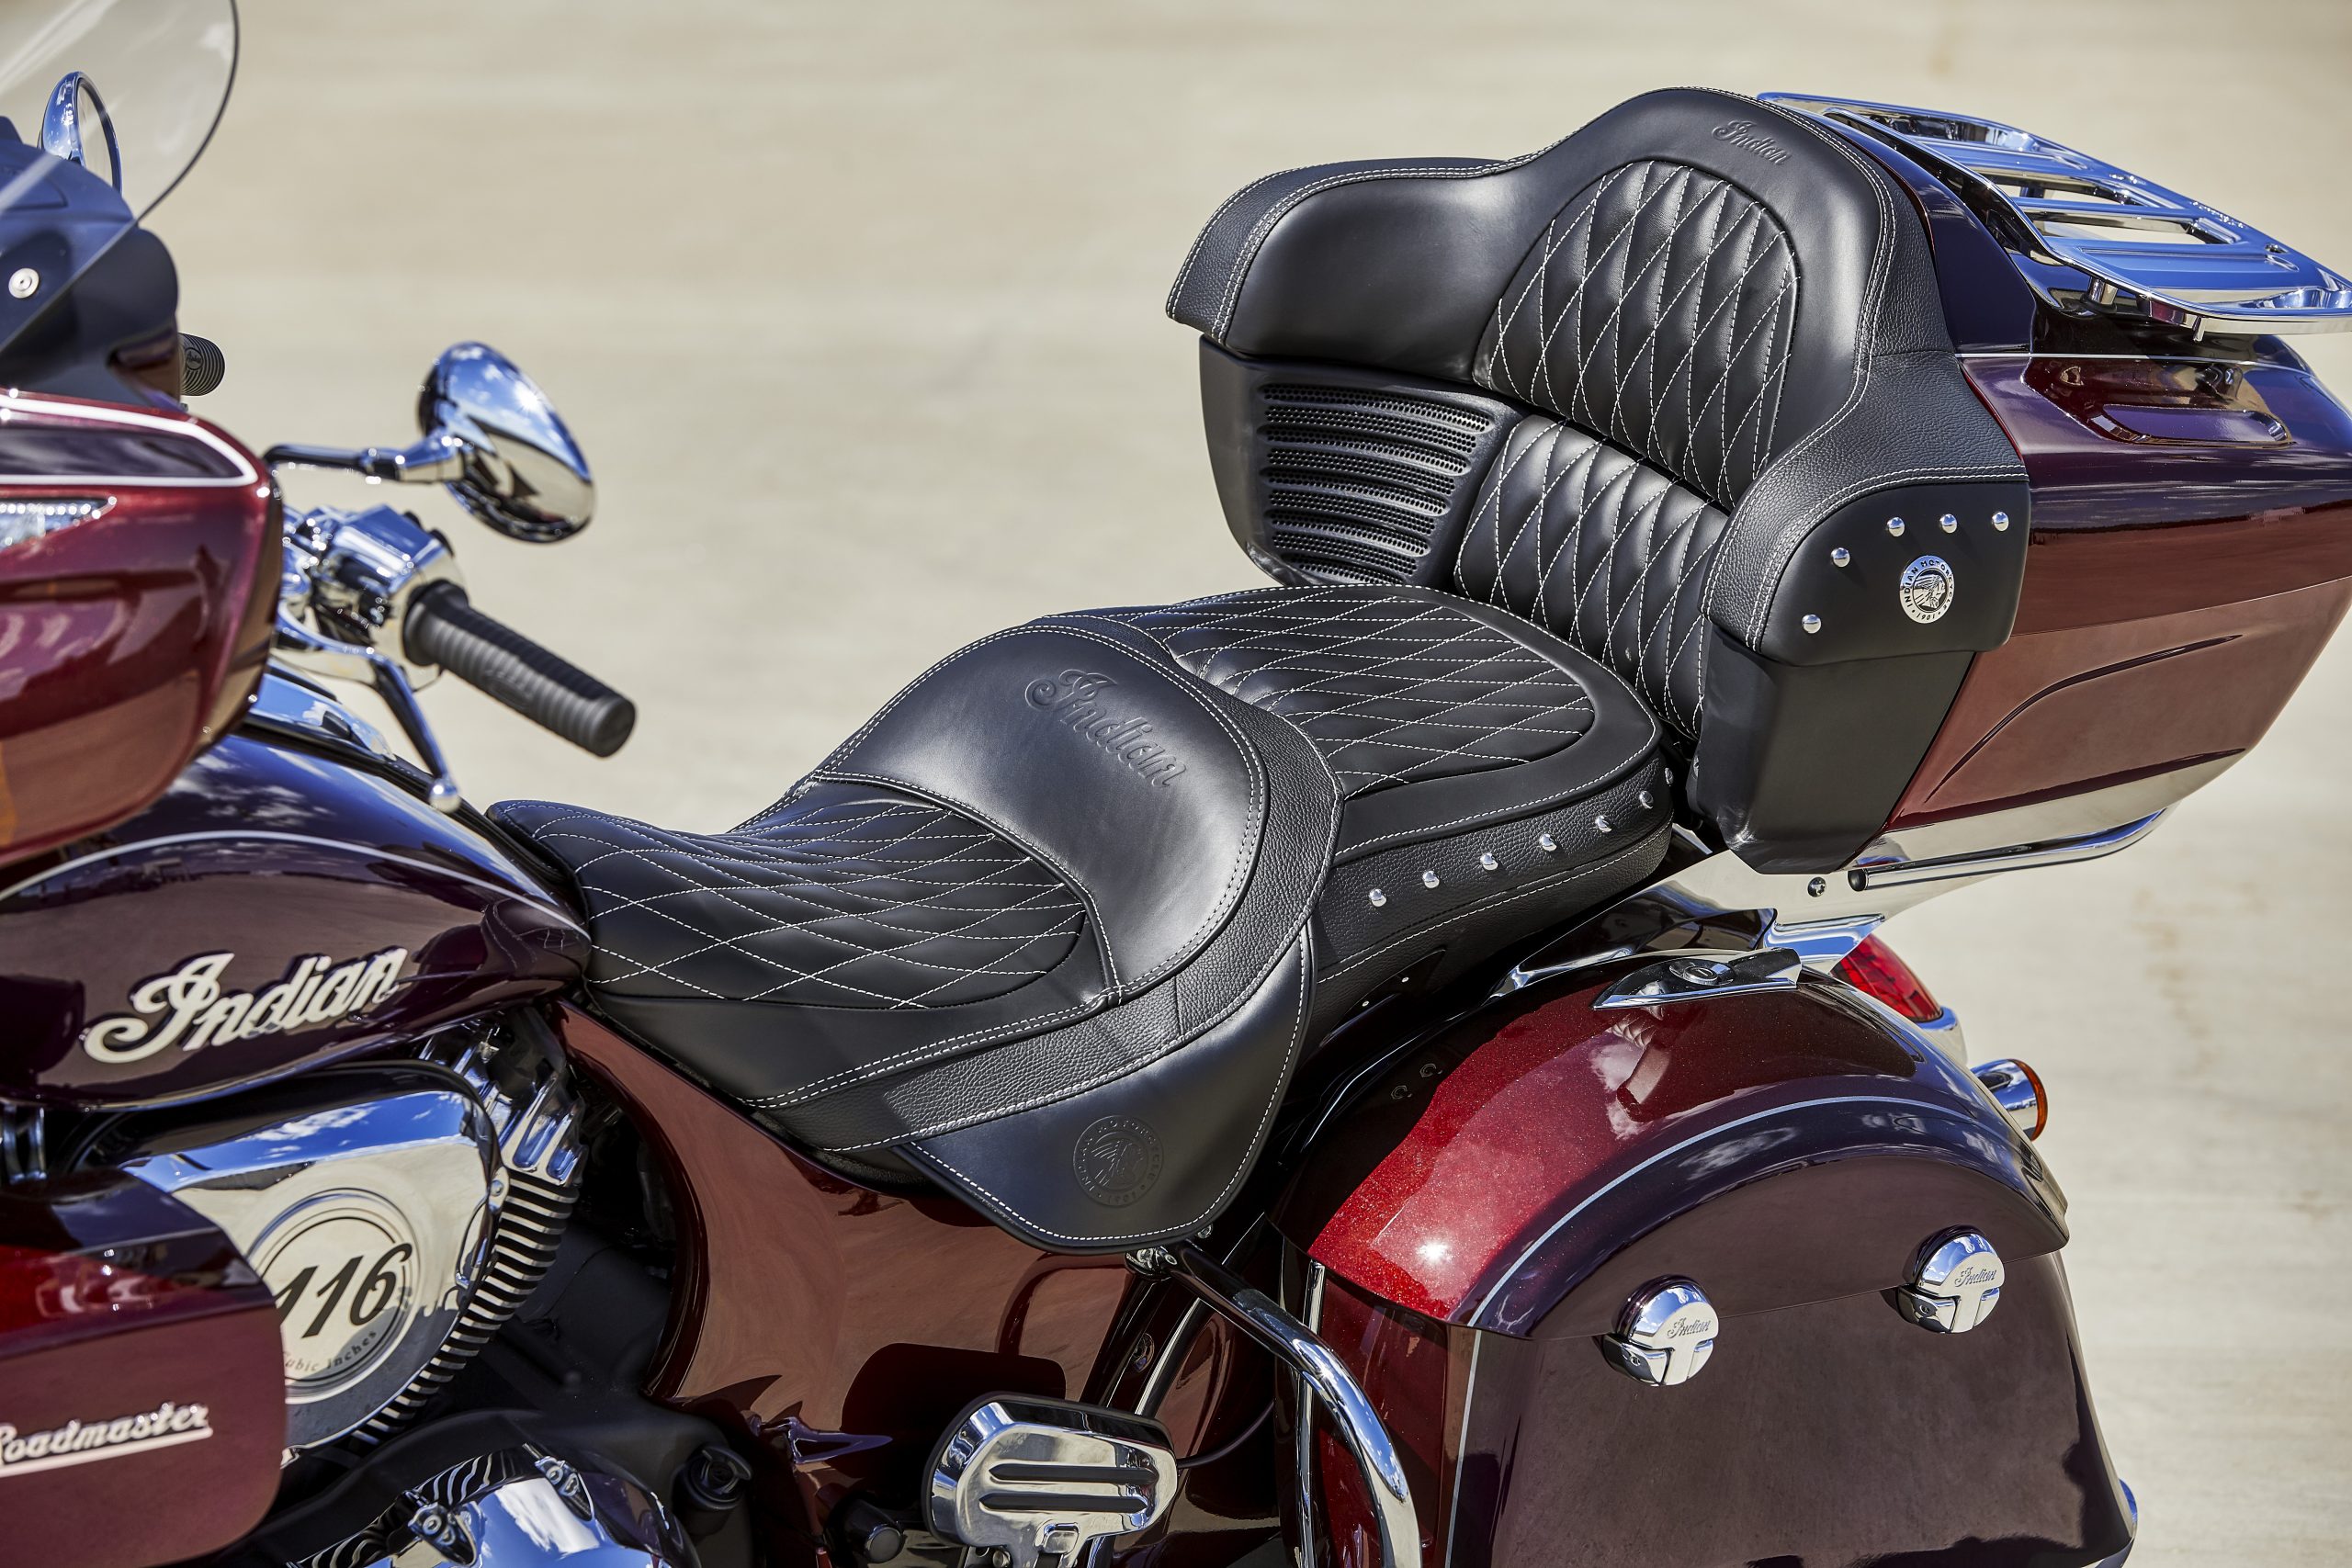 A close-up image of the seat on the Indian Roadmaster.